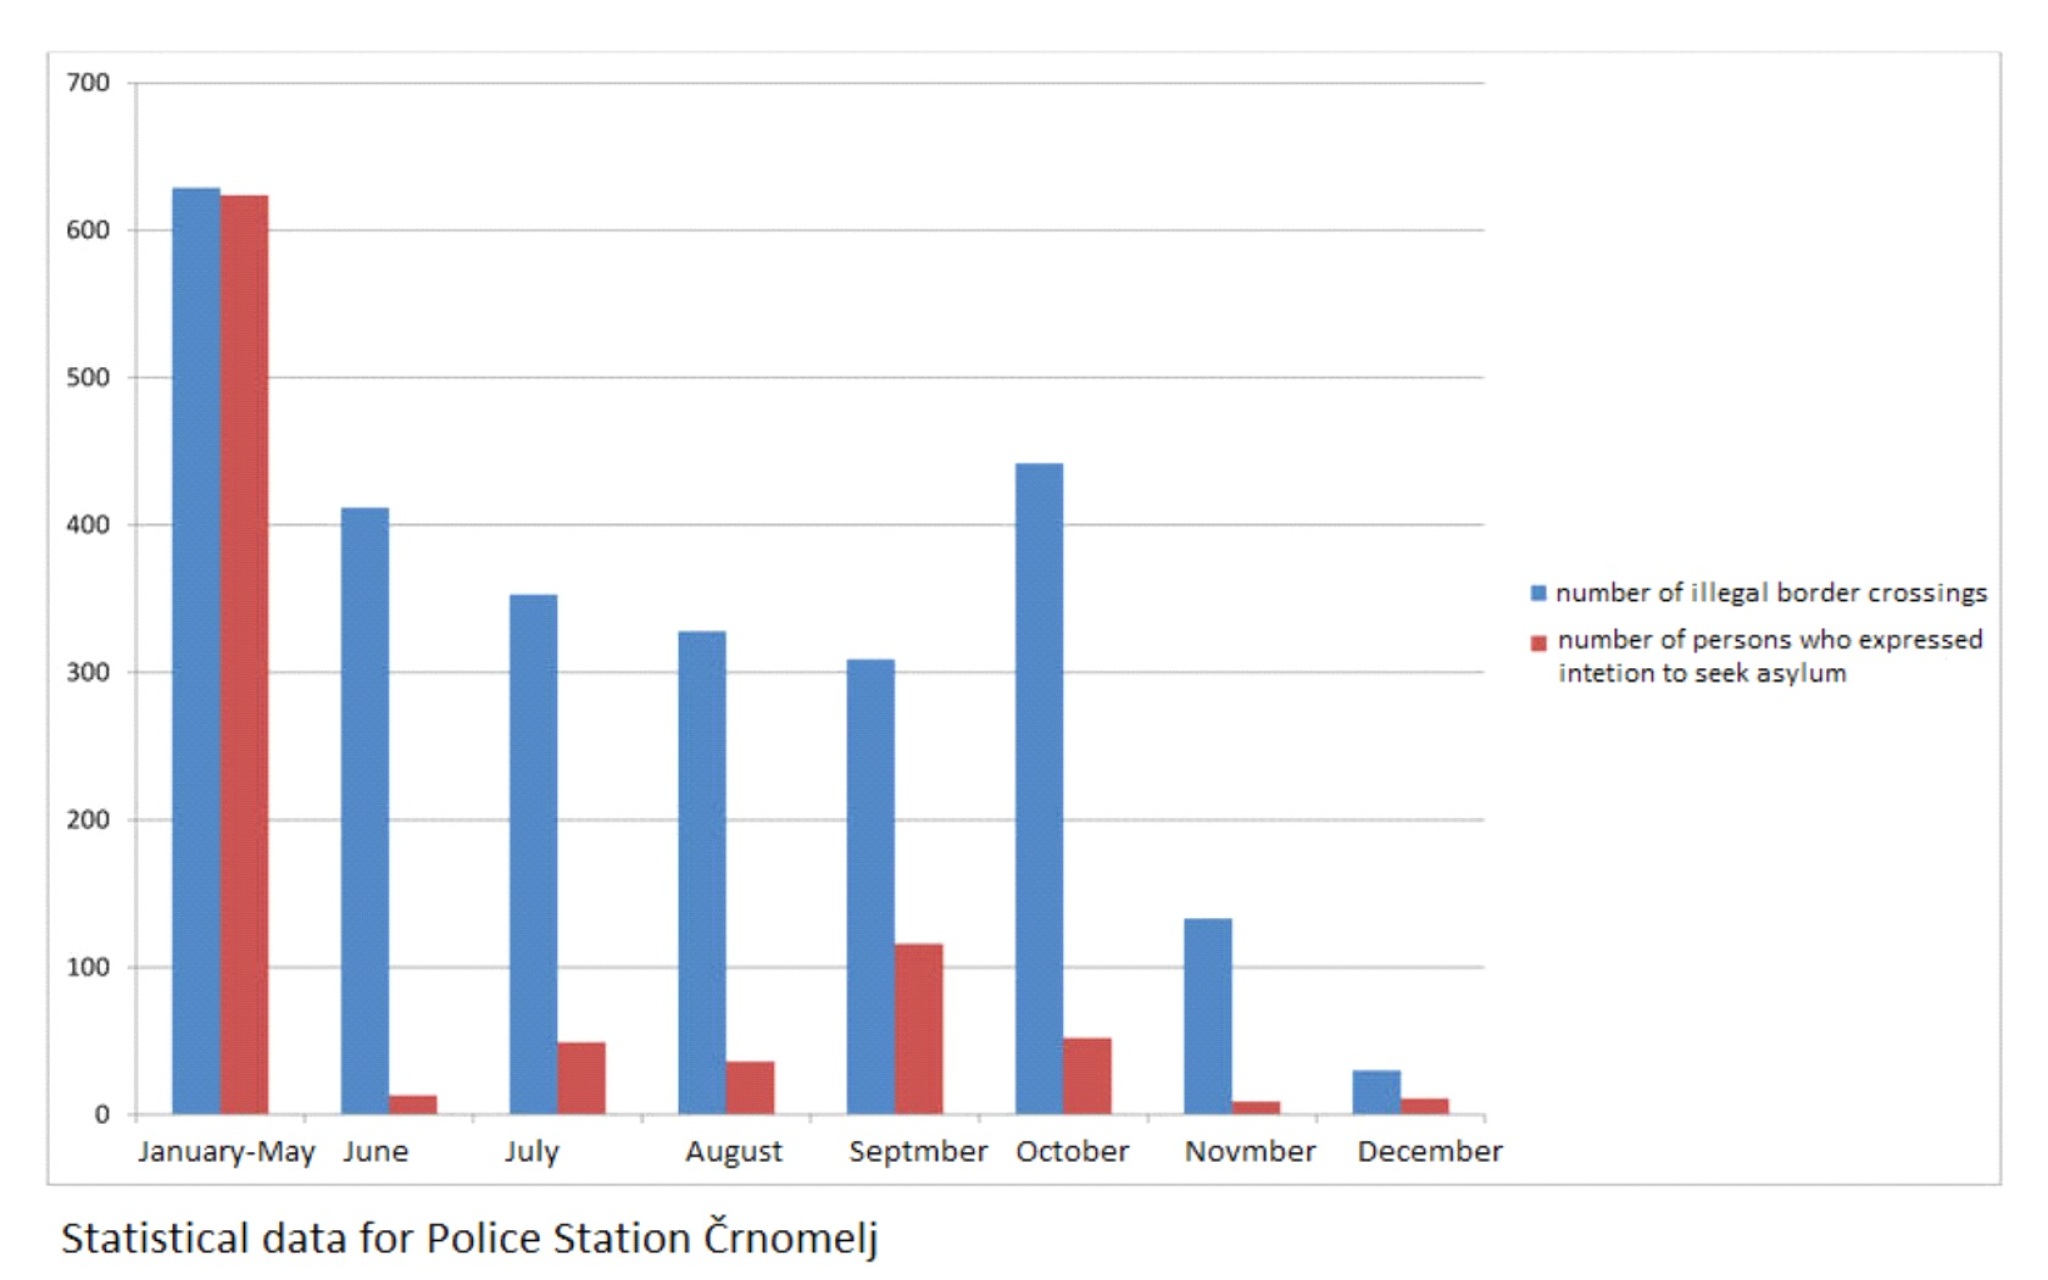 Picture 2: Number of illegal border crossings (blue), and number of persons who were able to express intention to seek asylum (red) at the police station Črnomelj in 2018.